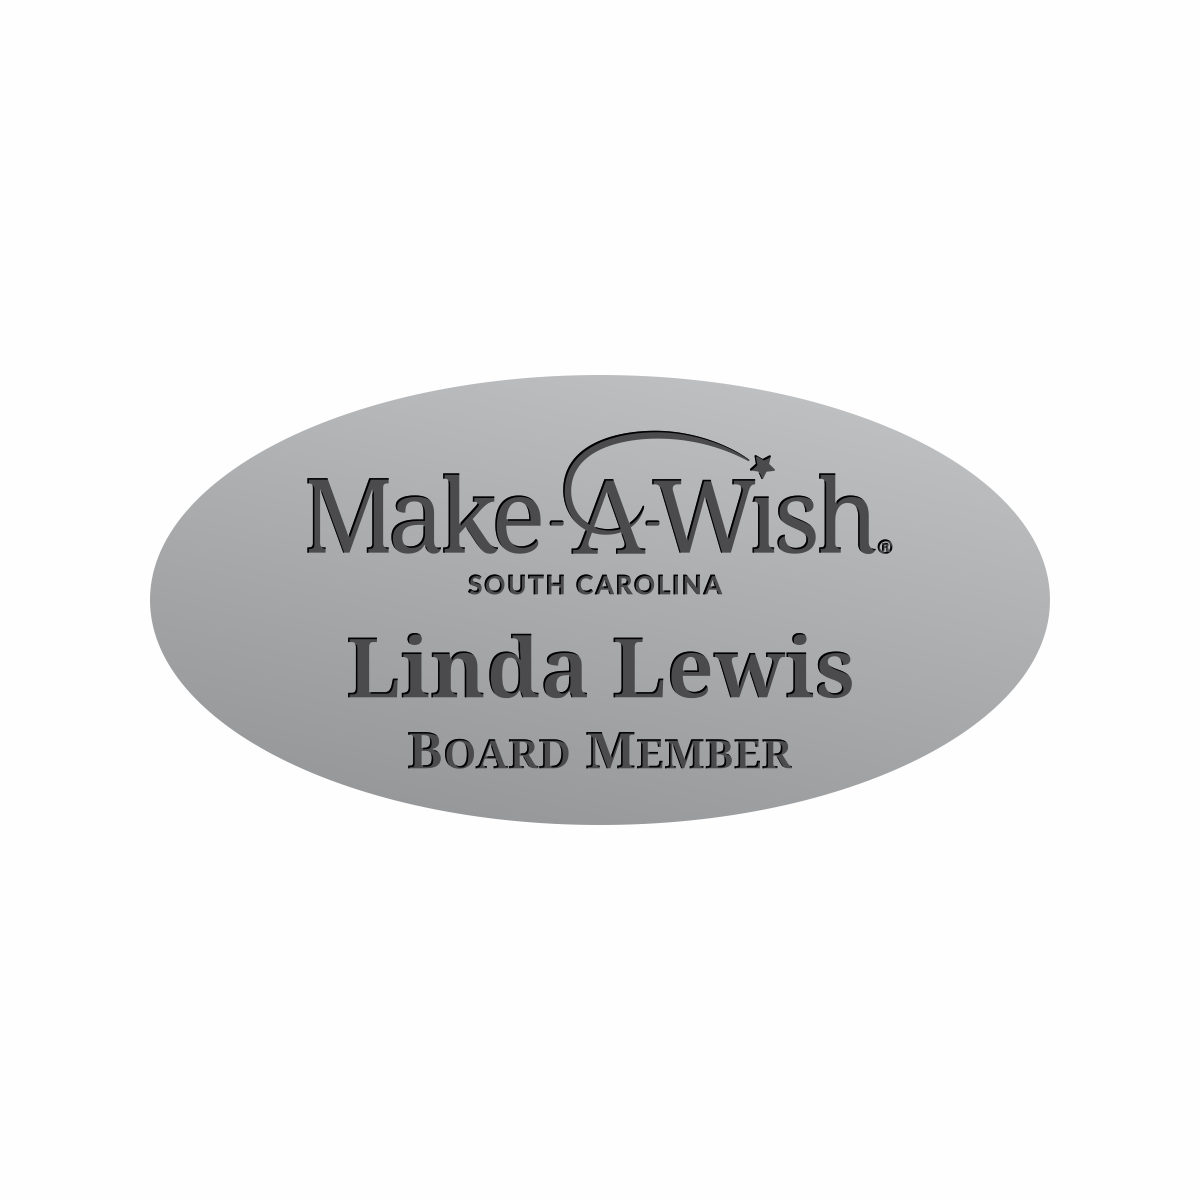 Engraved Badges with Oval Shape in Multiple Colors and Sizes